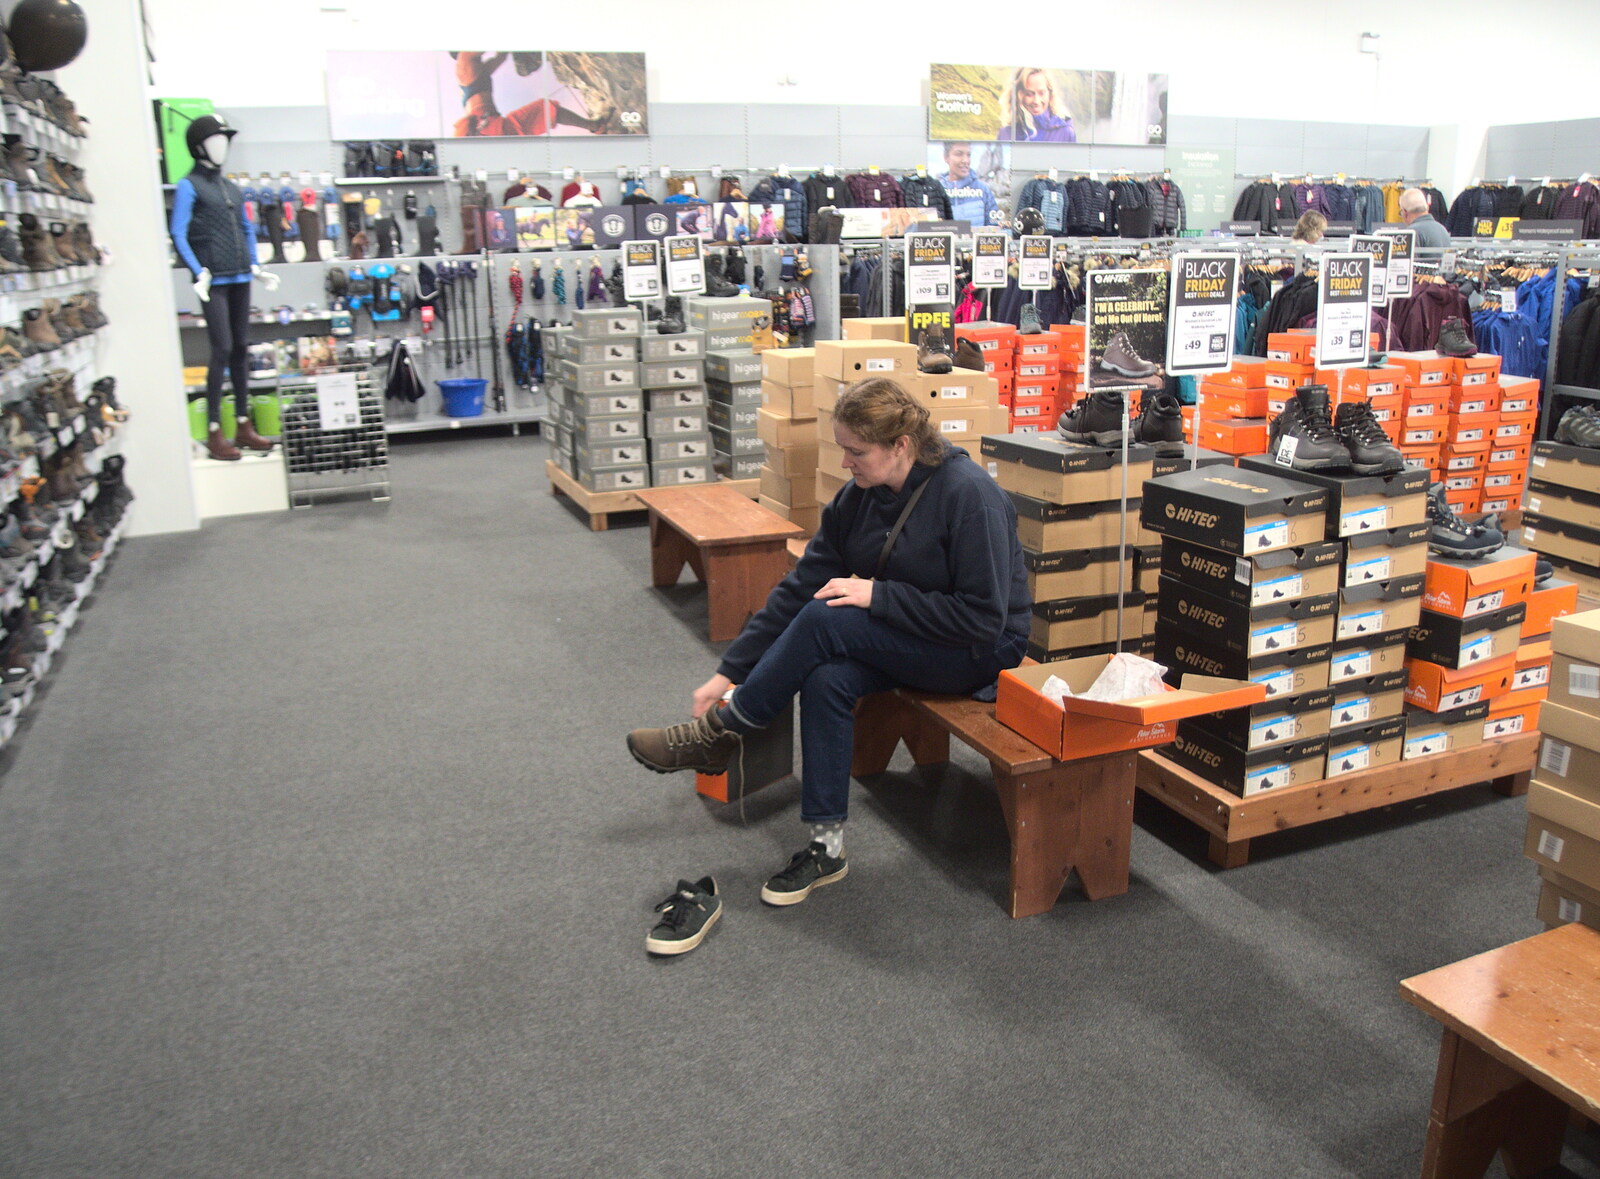 Isobel tries some shoes on in Go Outdoors from Lunch in Norwich and the GSB at Gislingham, Suffolk - 26th November 2022